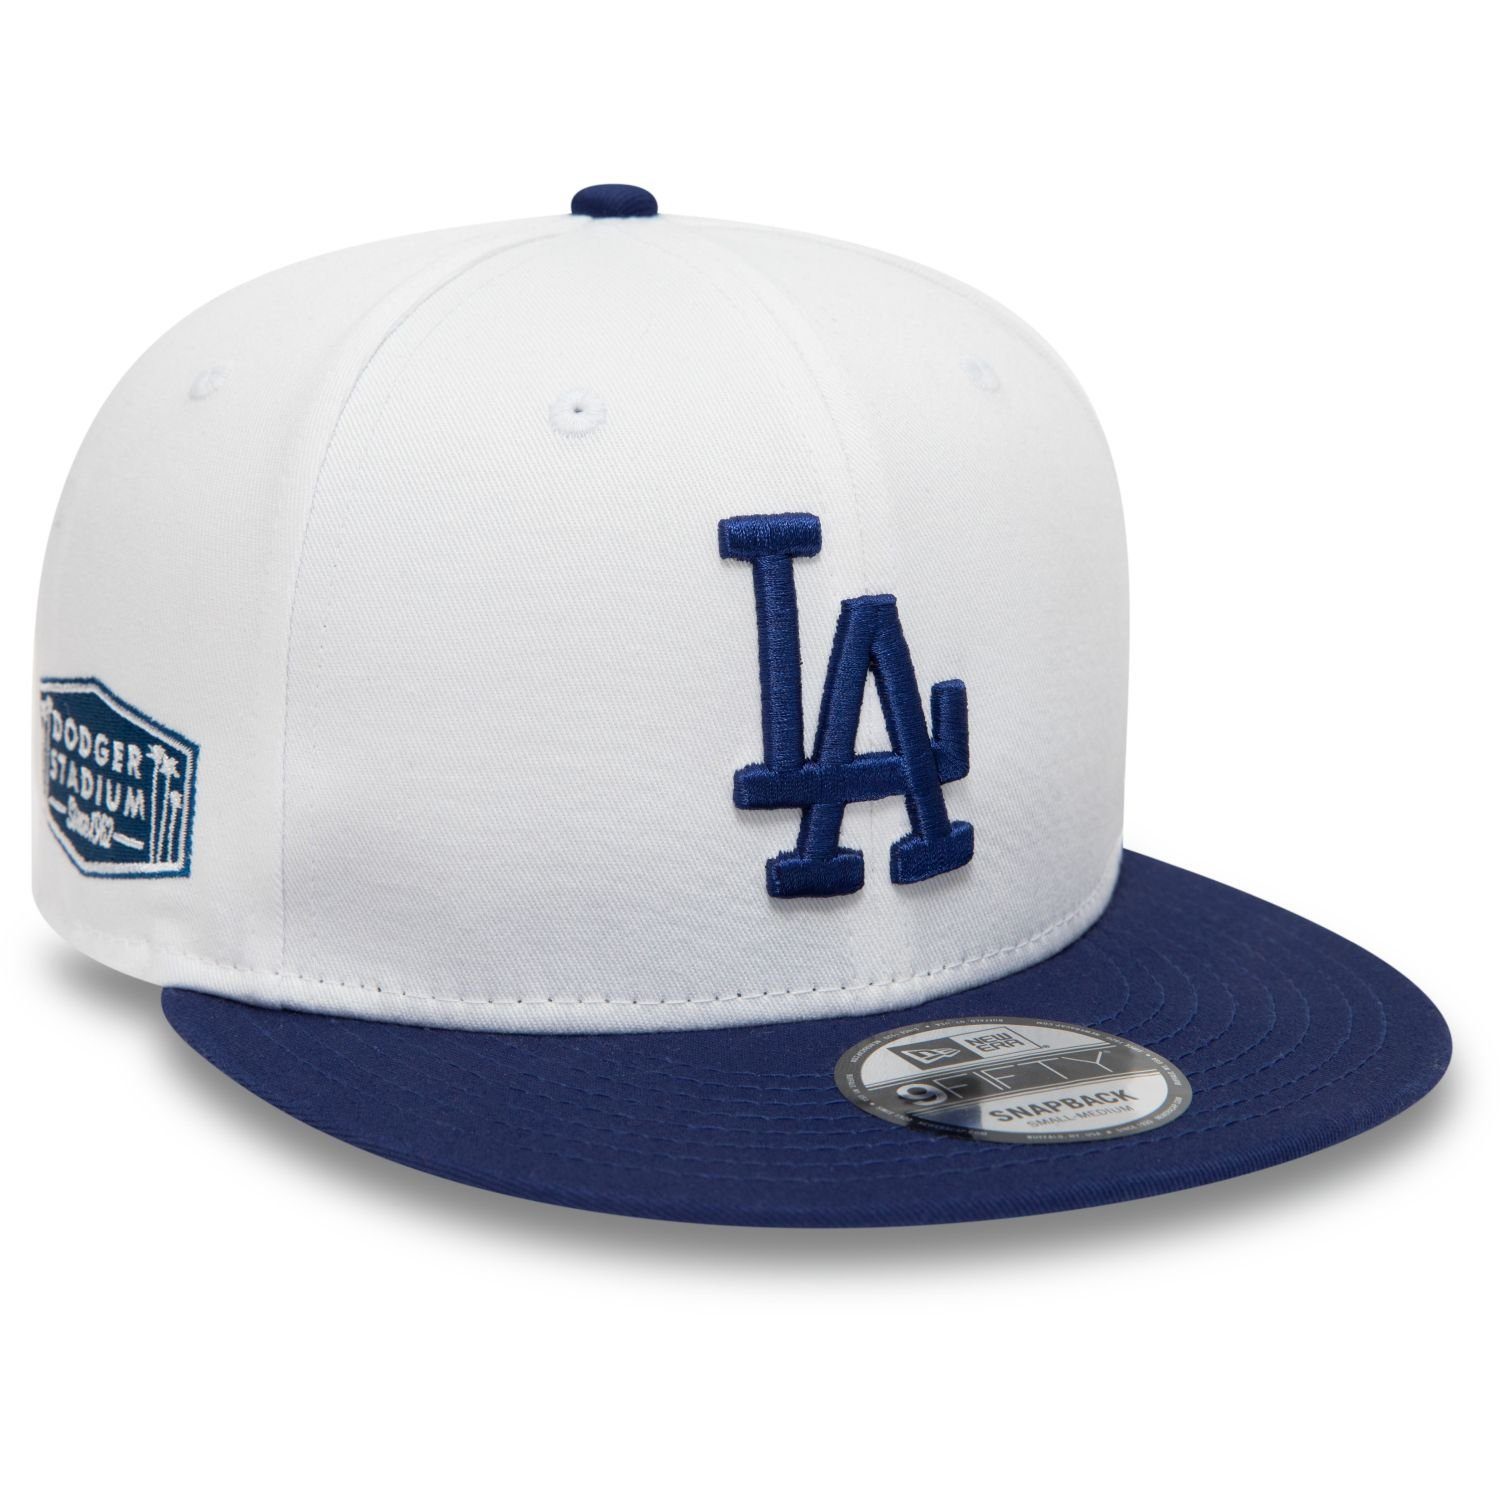 Dodgers Los Era Angeles 9Fifty Cap Snapback New PATCH SIDE